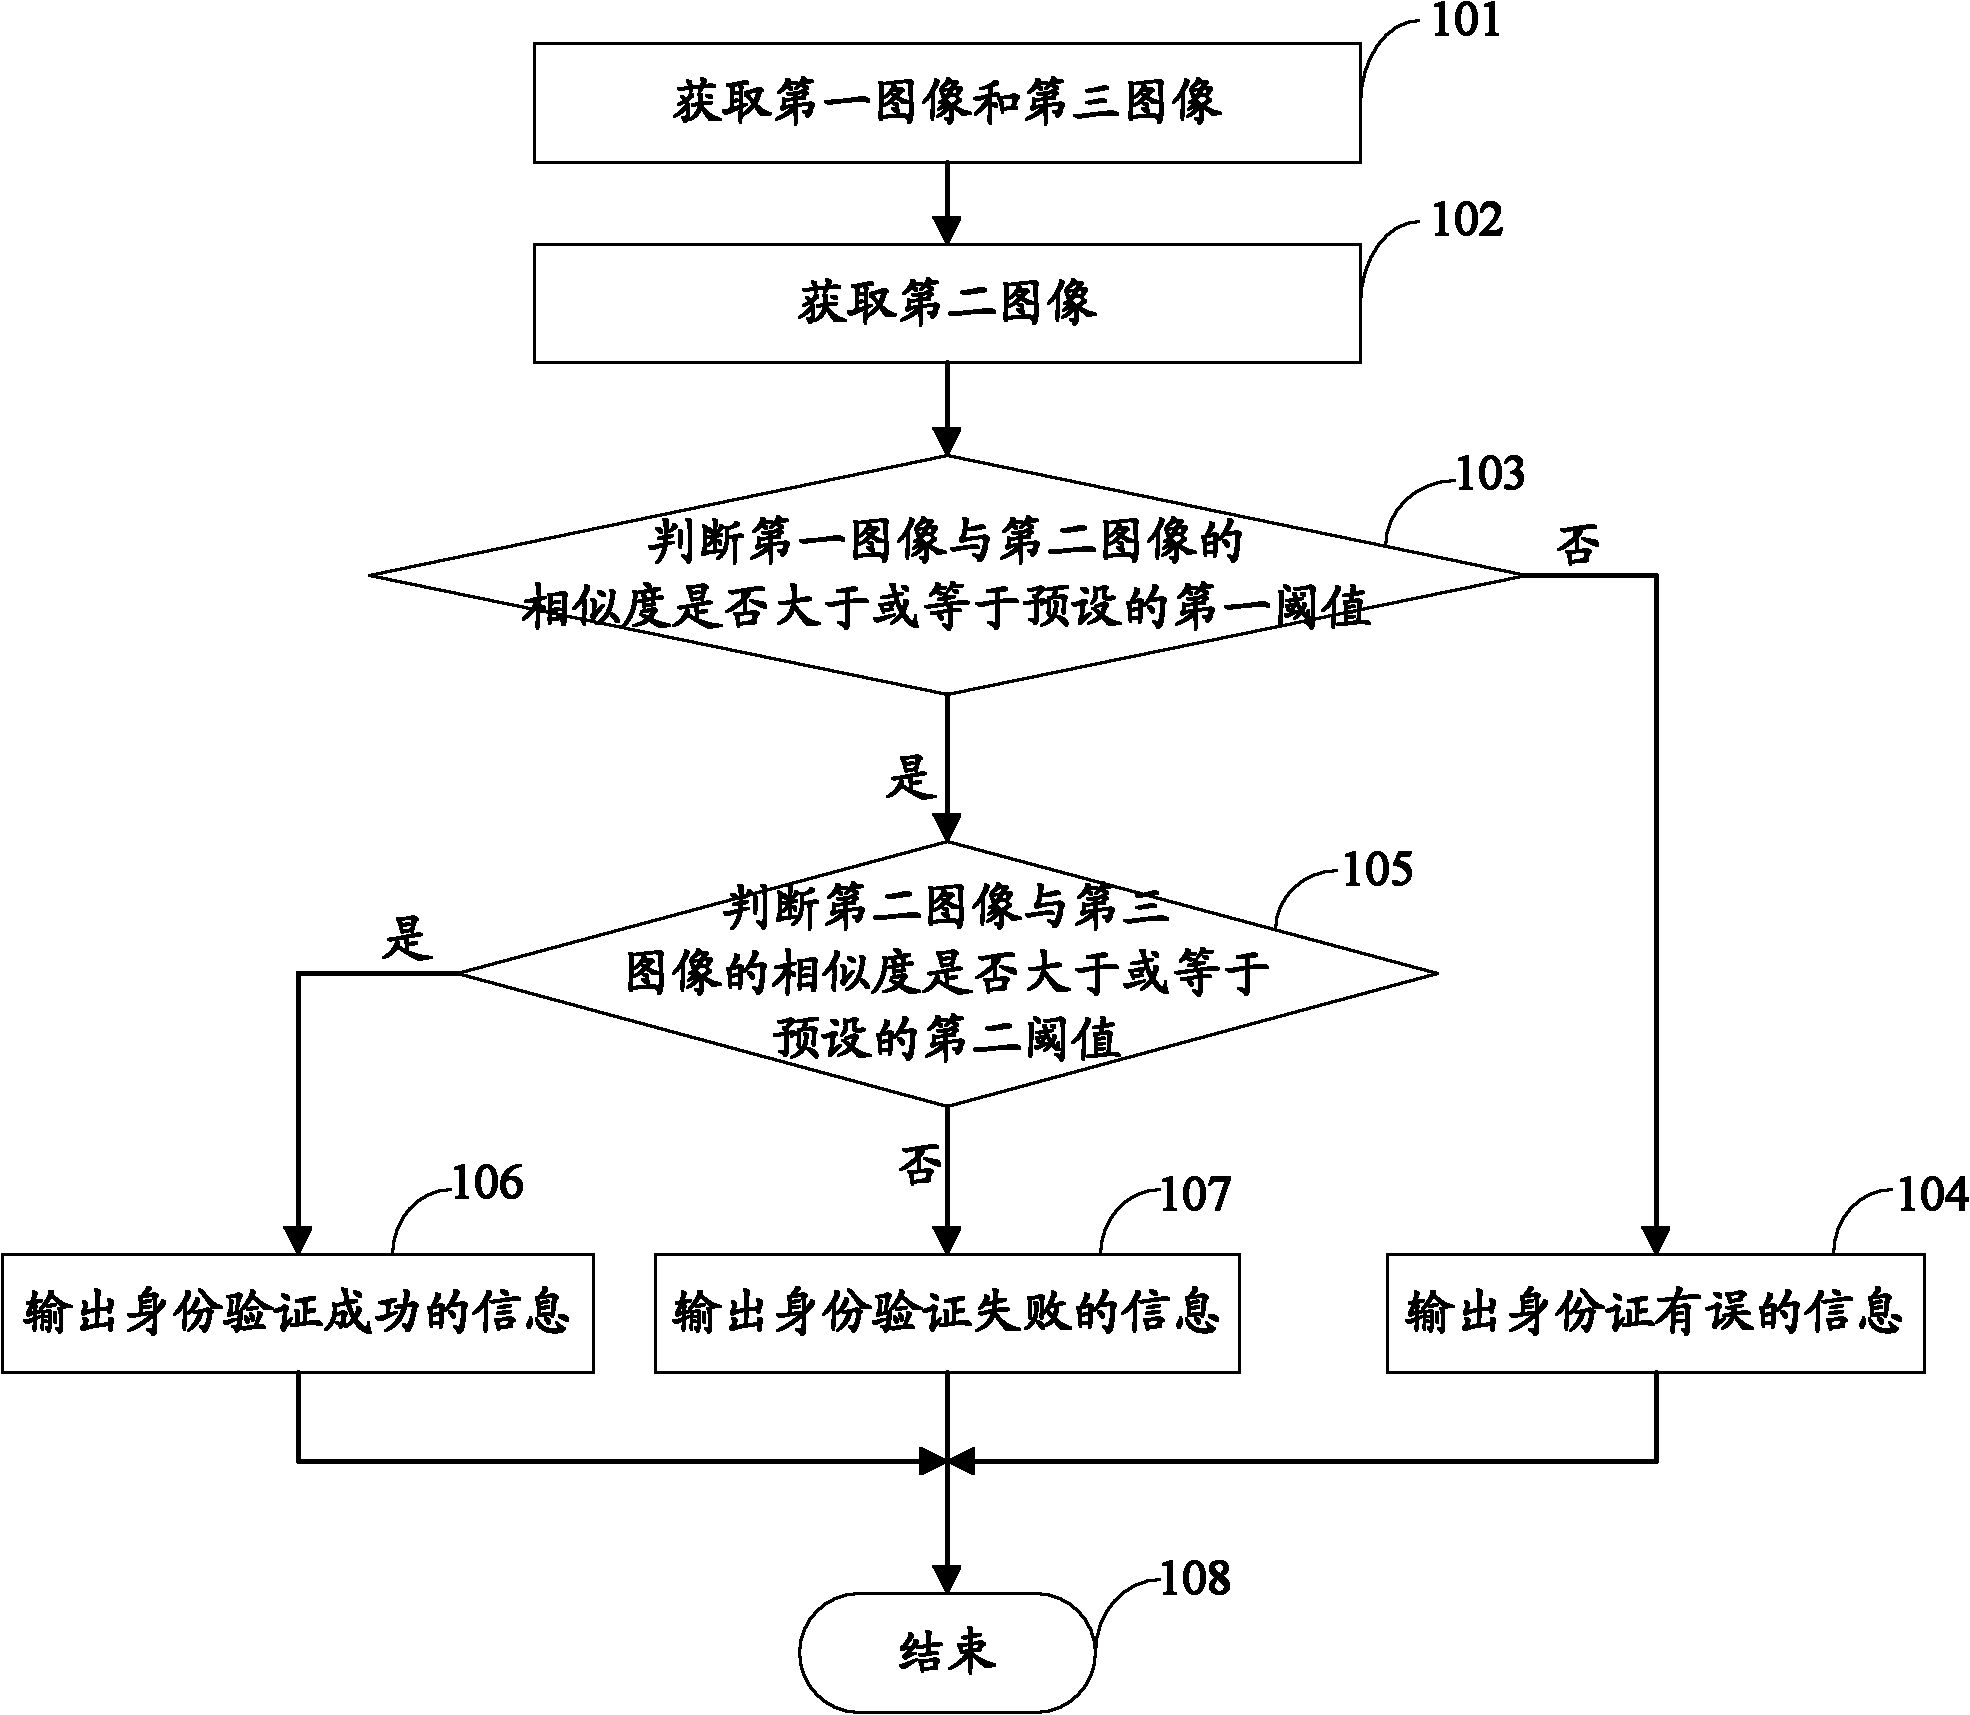 Second-generation identity card-based authentication method and system